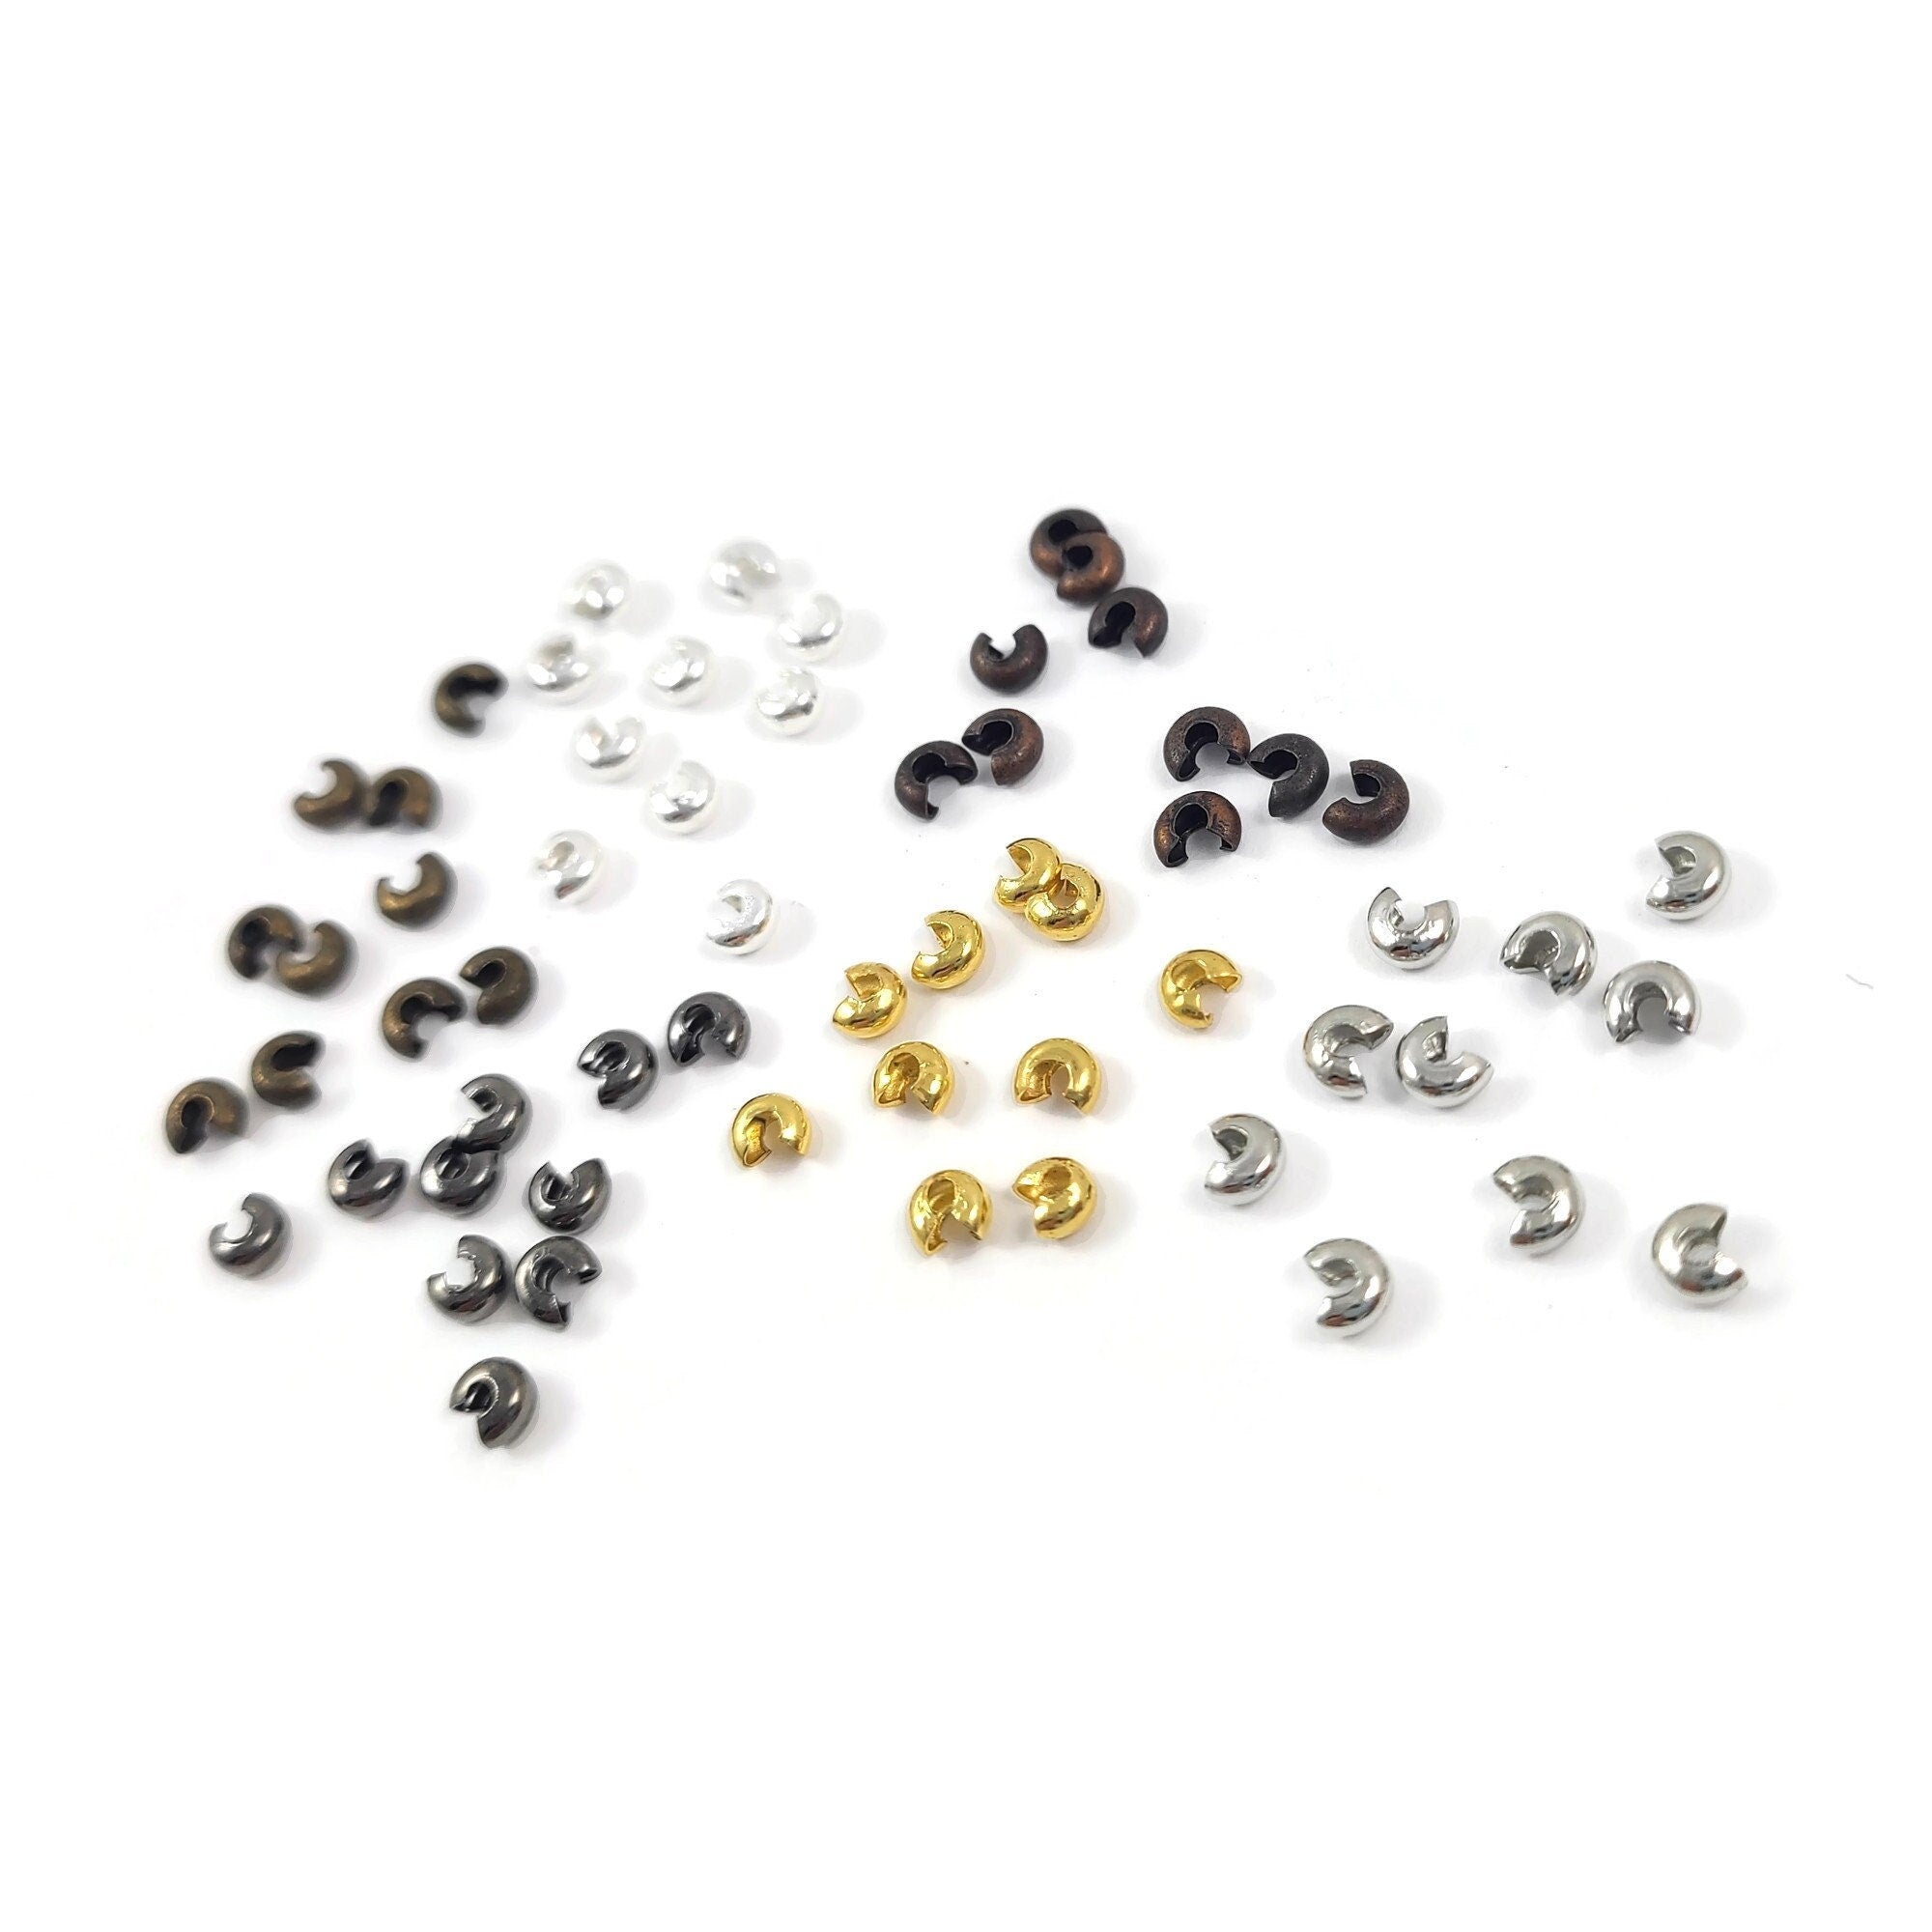 Crimp cover beads - Nickel, lead, and cadmium free - Hypoallergenic jewelry making findings - Cord ends